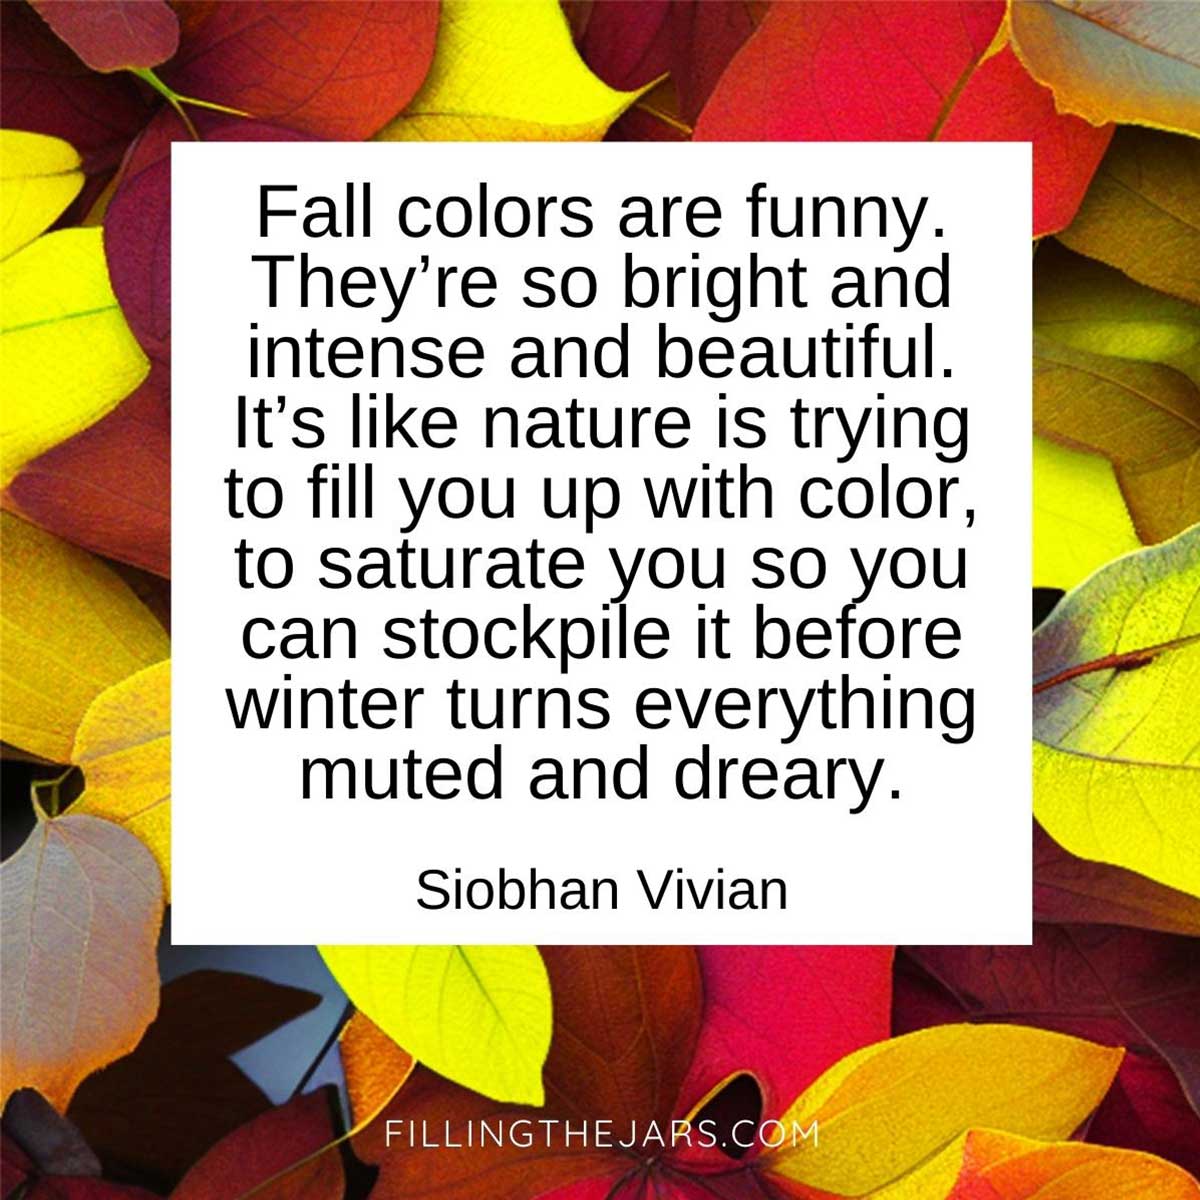 Siobhan Vivian fall colors quote on white background over vivid autumn leaves.